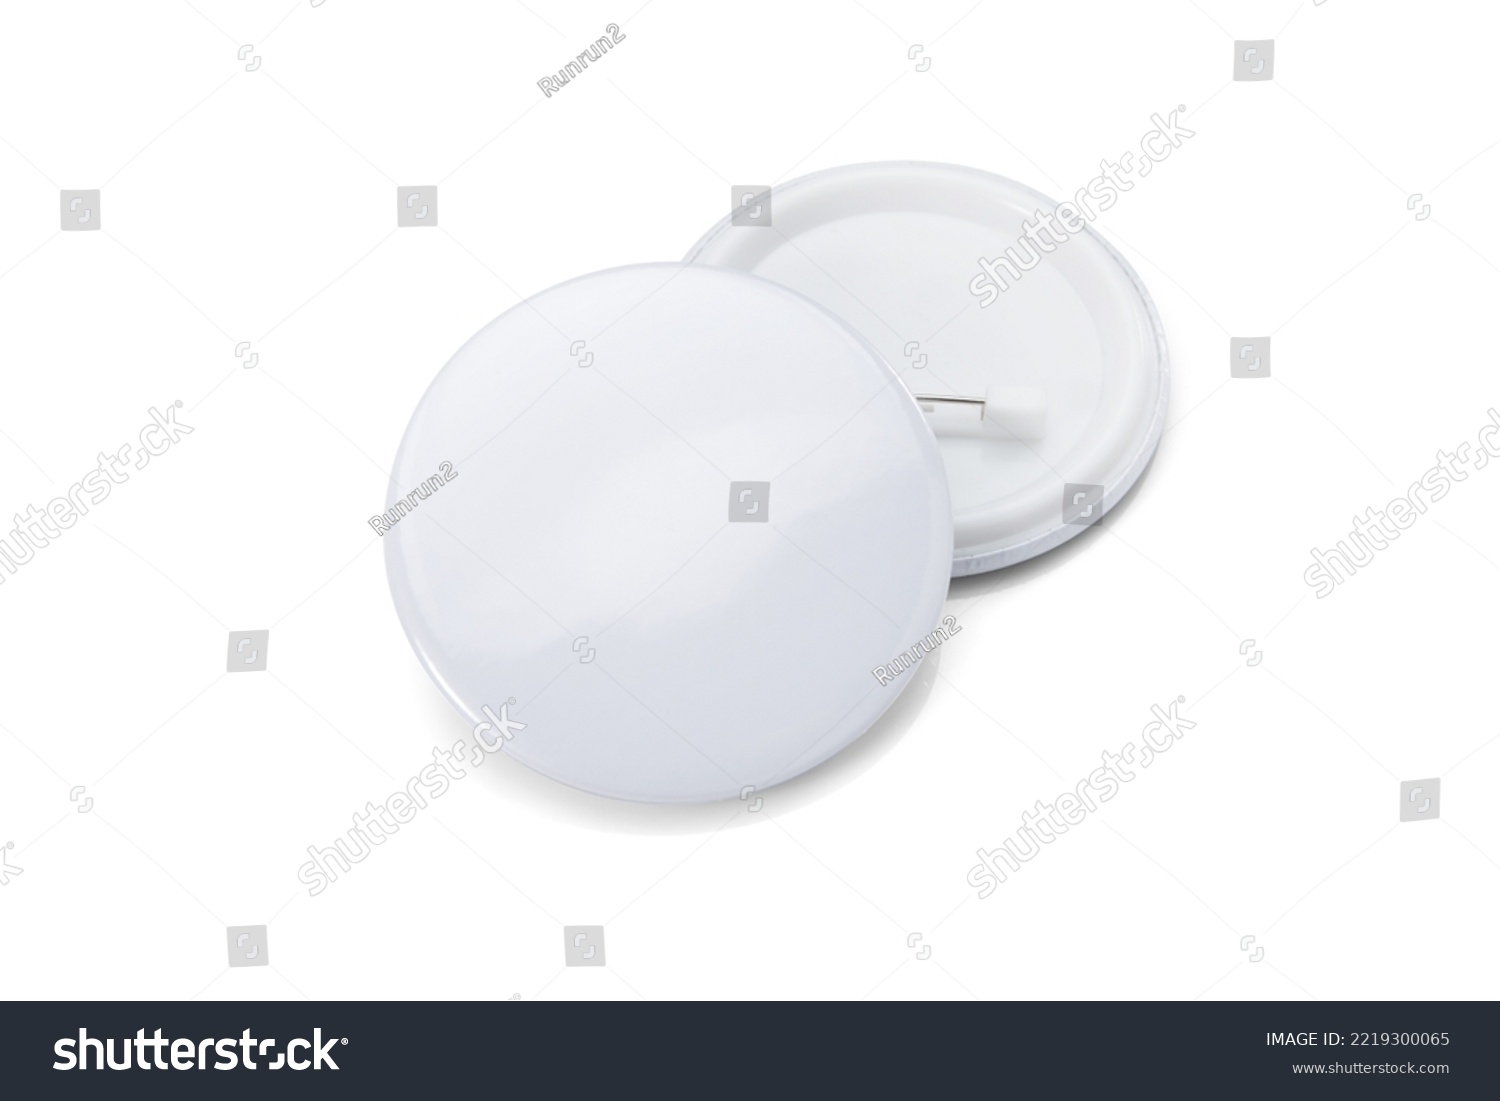 White blank badge. Glossy round button. Pin badge mockup isolated on white background #2219300065